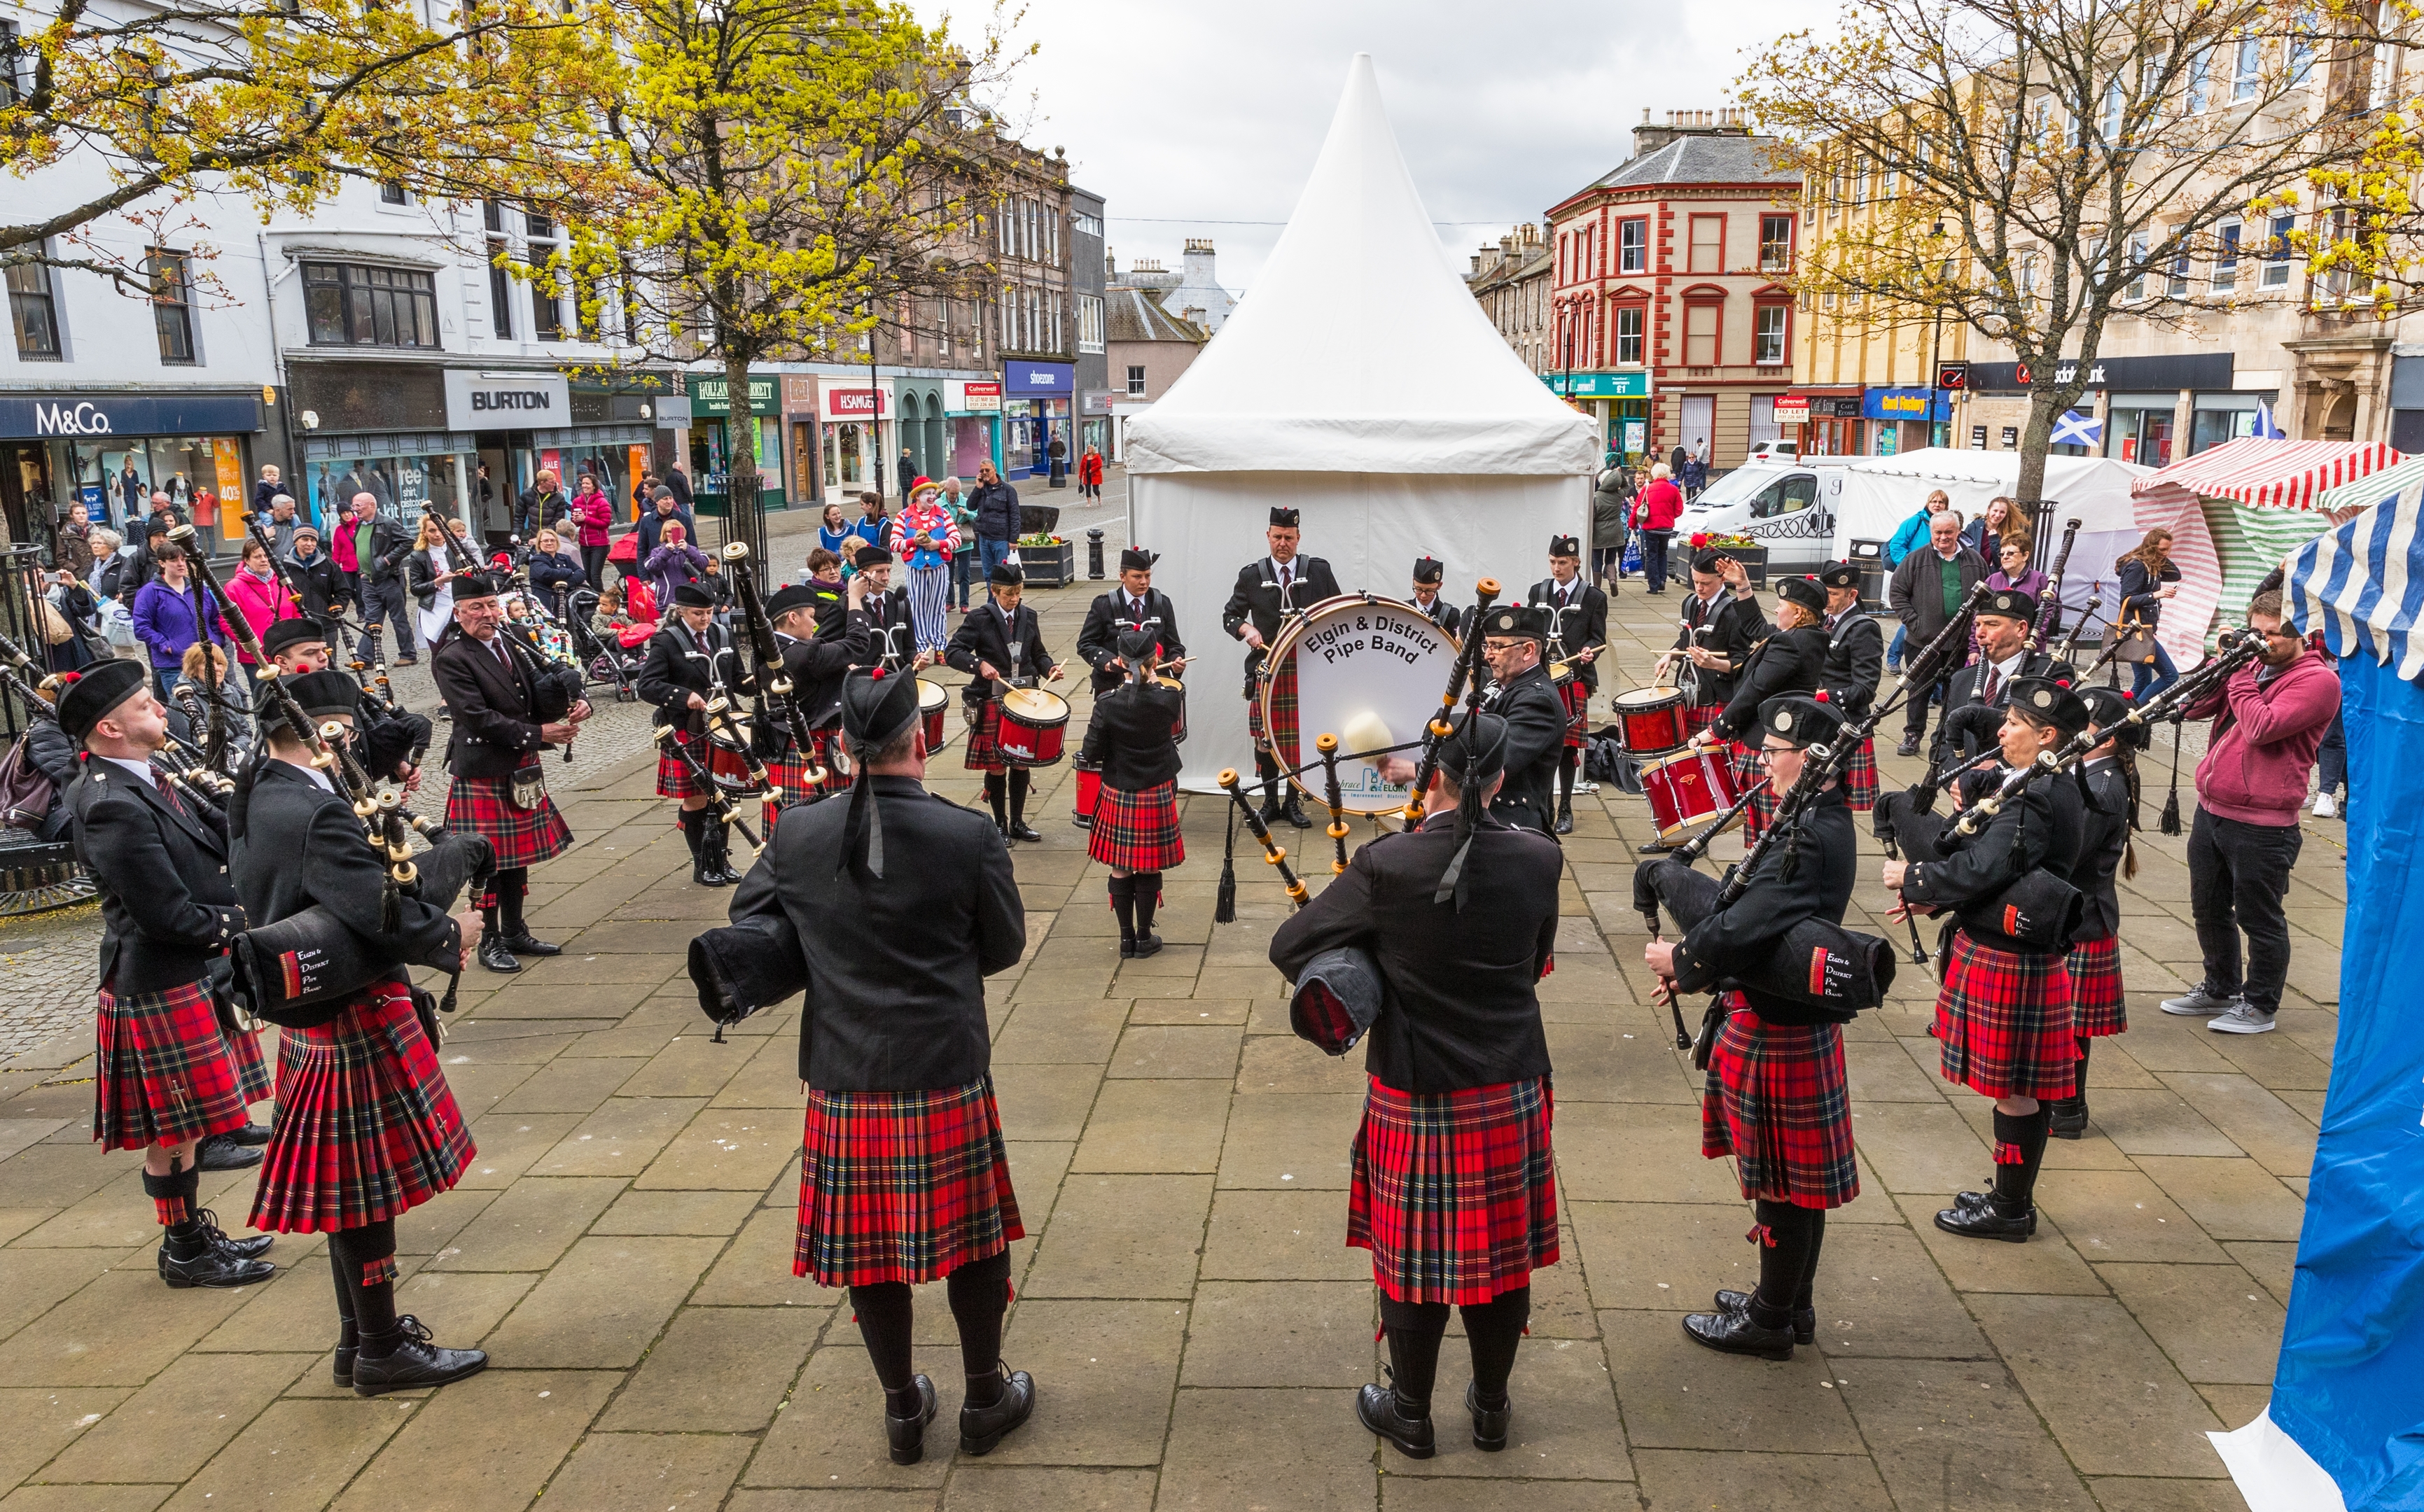 Elgin and District Pipe Band entertain on plainstones.